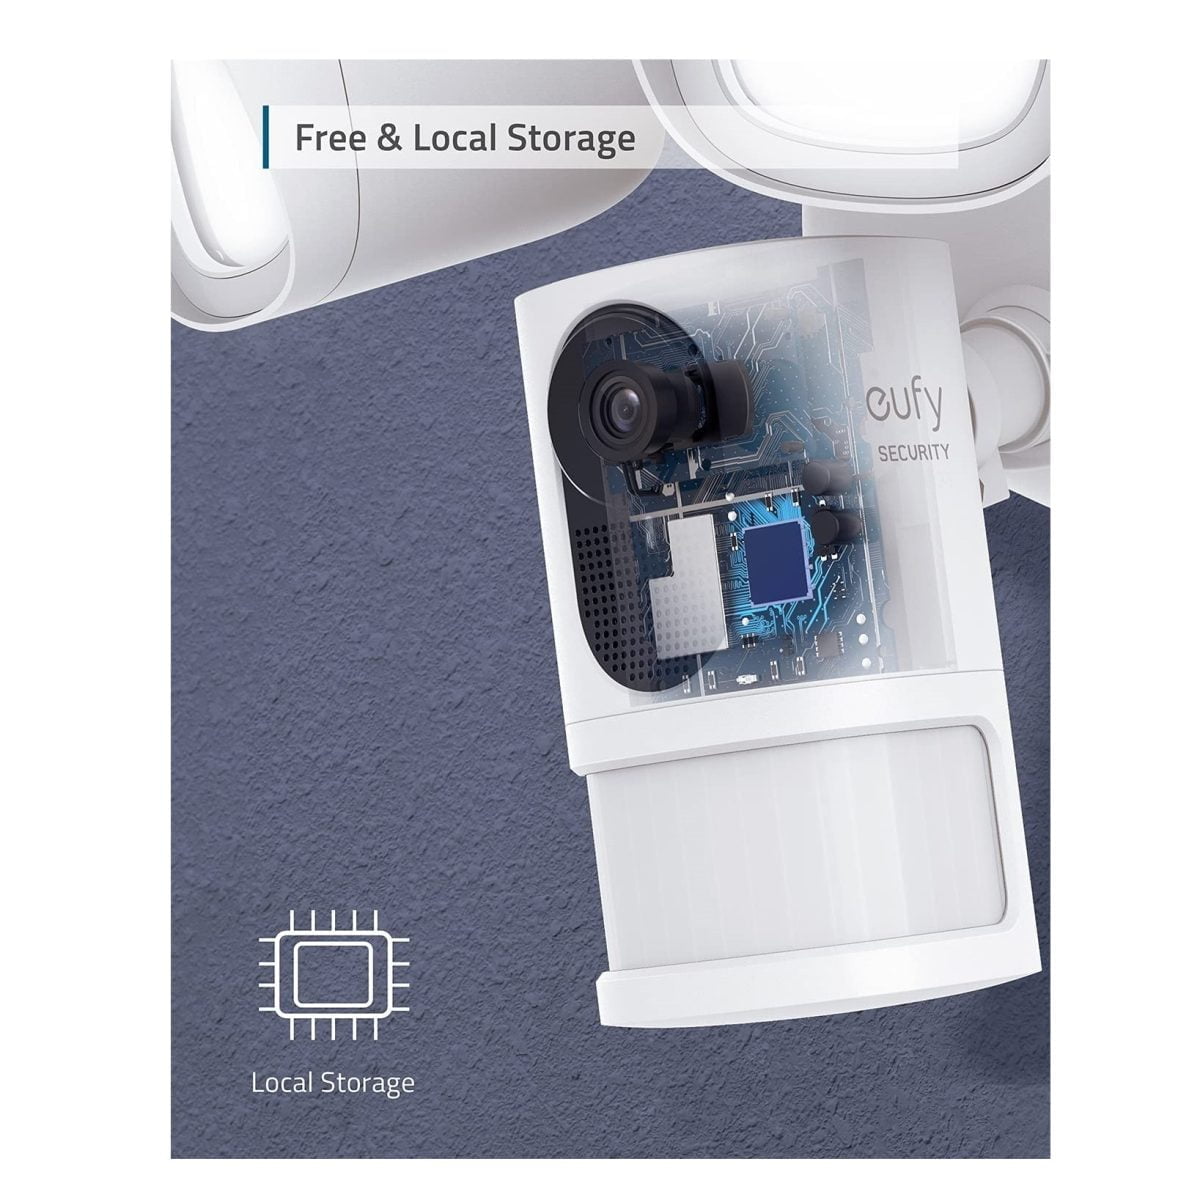 71Grcmwjbes. Ac Sl1500 1 Eufy &Lt;H1 Class=&Quot;Product-Meta__Title Heading H1&Quot;&Gt;Eufy Security Floodlight Camera 1080&Lt;Span Style=&Quot;Color: #333333; Font-Size: 16Px;&Quot;&Gt; &Lt;/Span&Gt;&Lt;/H1&Gt; Https://Www.youtube.com/Watch?V=Sskynd9Kubc &Lt;Ul Class=&Quot;A-Unordered-List A-Vertical A-Spacing-Mini&Quot;&Gt; &Lt;Li&Gt;&Lt;Span Class=&Quot;A-List-Item&Quot;&Gt;Drop-In Anytime In 1080 : Live-Stream And Record In Full 2K Hd So You Can See Exactly Who’s There In Crisp Clarity.&Lt;/Span&Gt;&Lt;/Li&Gt; &Lt;Li&Gt;&Lt;Span Class=&Quot;A-List-Item&Quot;&Gt;No Hidden Costs: Designed To Protect Your Home As Well As Your Wallet, Eufy Security Products Are One-Time Purchases That Combine Security With Convenience.&Lt;/Span&Gt;&Lt;/Li&Gt; &Lt;Li&Gt;&Lt;Span Class=&Quot;A-List-Item&Quot;&Gt;Turn Night Into Day: 2,500-Lumen Super-Bright Motion-Activated Floodlights Deter Intruders And Ensure Detailed, Full-Color Recordings Even At Night.&Lt;/Span&Gt;&Lt;/Li&Gt; &Lt;Li&Gt;&Lt;Span Class=&Quot;A-List-Item&Quot;&Gt;Smart Siren: A Harsh Warning For Any Intruders. A High-Volume Alarm Can Be Triggered To Scare Off Any Unwanted Visitors.&Lt;/Span&Gt;&Lt;/Li&Gt; &Lt;Li&Gt;&Lt;Span Class=&Quot;A-List-Item&Quot;&Gt;Intelligent Detection And Notifications: The Built-In Ai Reduces The Number Of False Alerts You Receive By Intelligently Differentiating People From Objects. Note: Not Compatible With Homebase.&Lt;/Span&Gt;&Lt;/Li&Gt; &Lt;/Ul&Gt; &Lt;H5&Gt;Warranty: Eufy Product Warranty&Lt;/H5&Gt; Floodlight Eufy Security Floodlight Camera 1080 Wired T84203W2